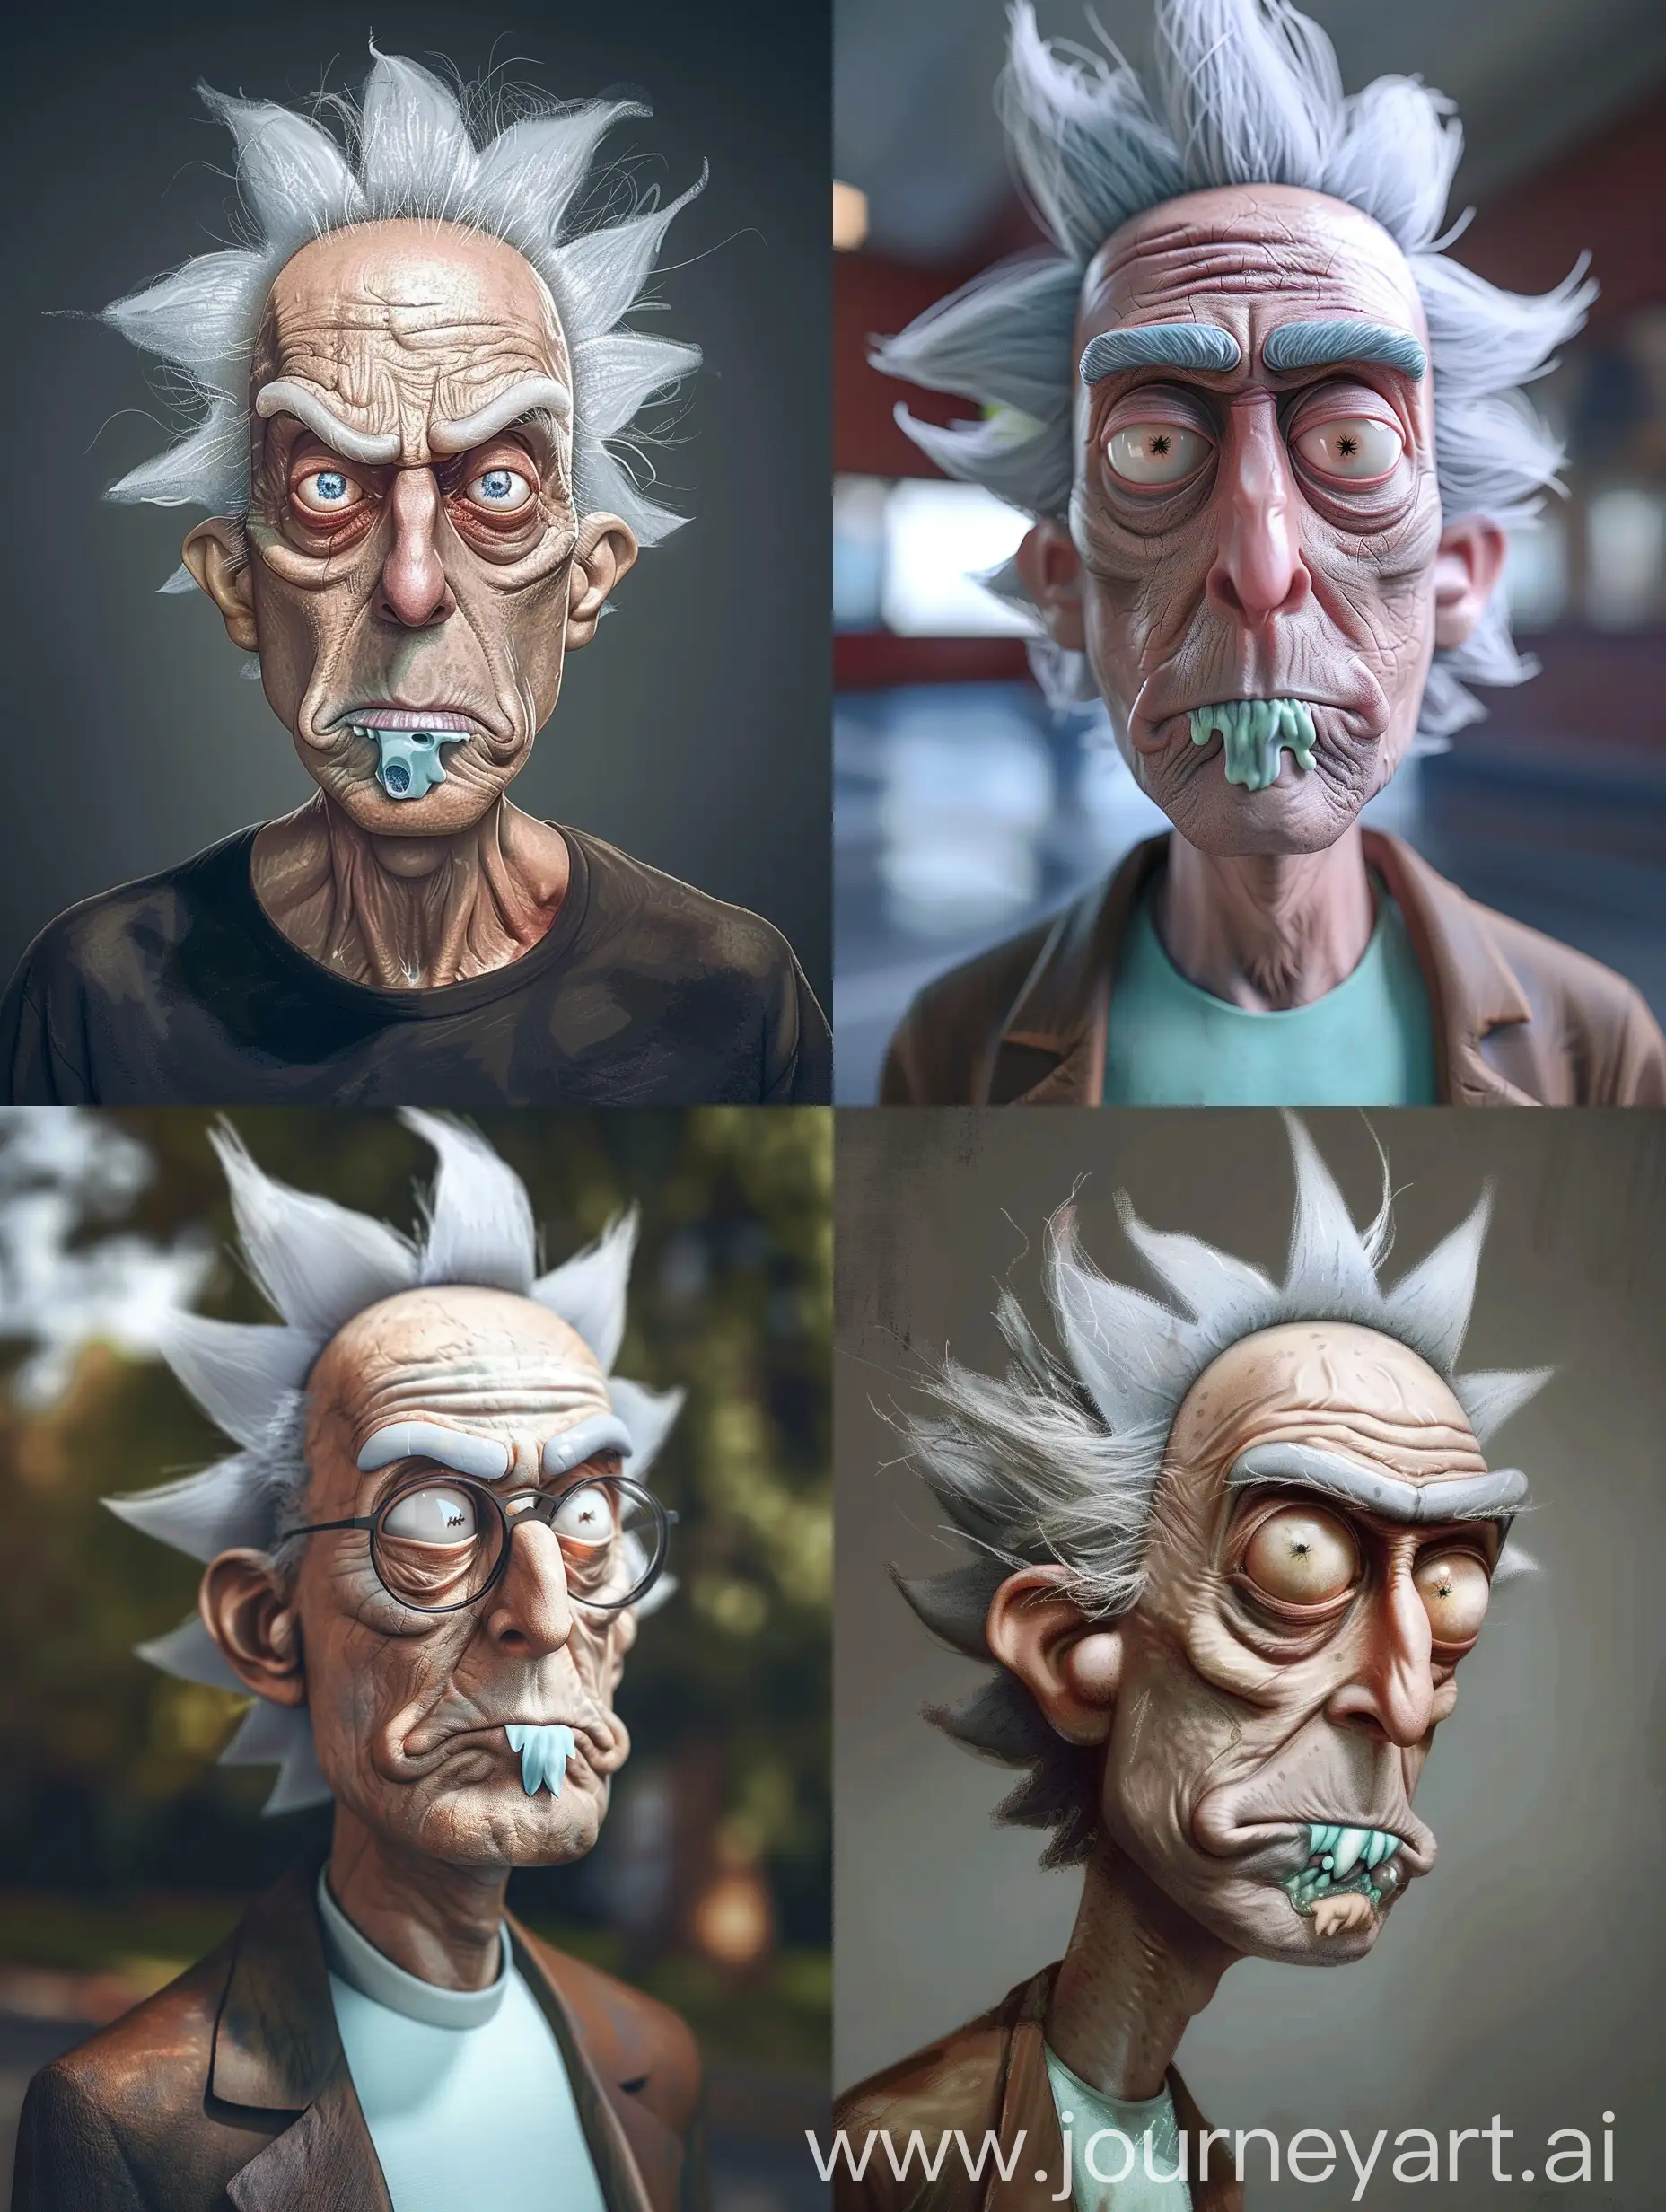 Realistic-Portrait-of-Rick-Sanchez-from-Rick-and-Morty-Animated-Series